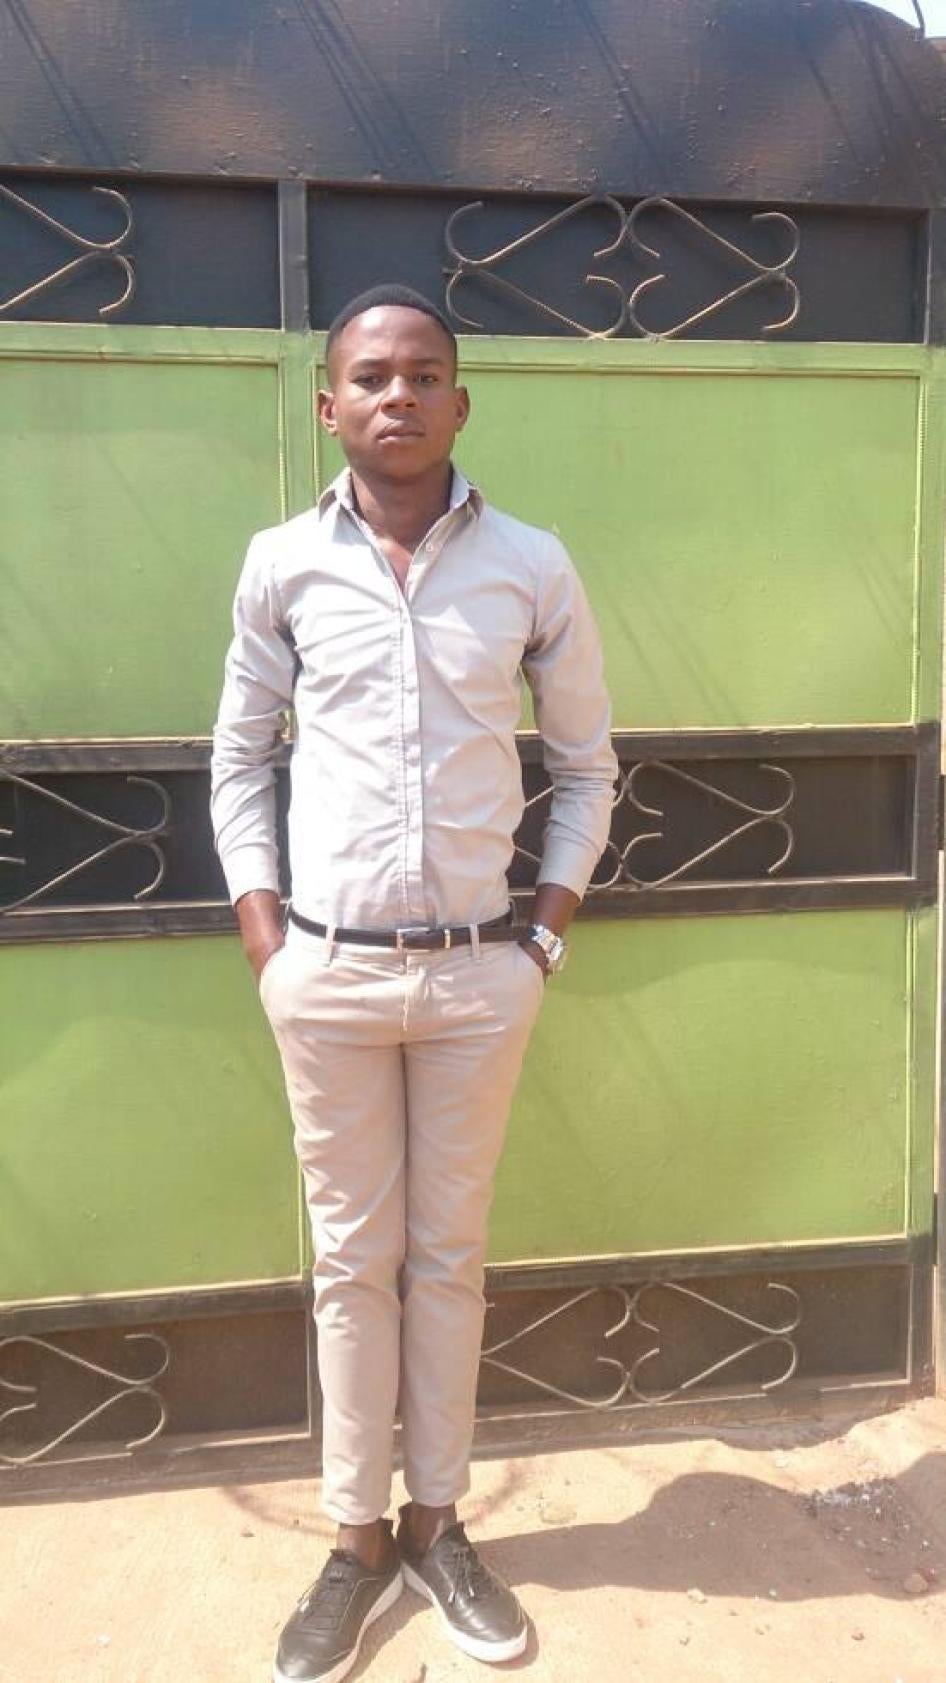 Olivier Tchamala Kambaji, a 19-year-old student and phone airtime vendor, was killed in Kasumbalesa, Democratic Republic of Congo, on August 3, 2018.